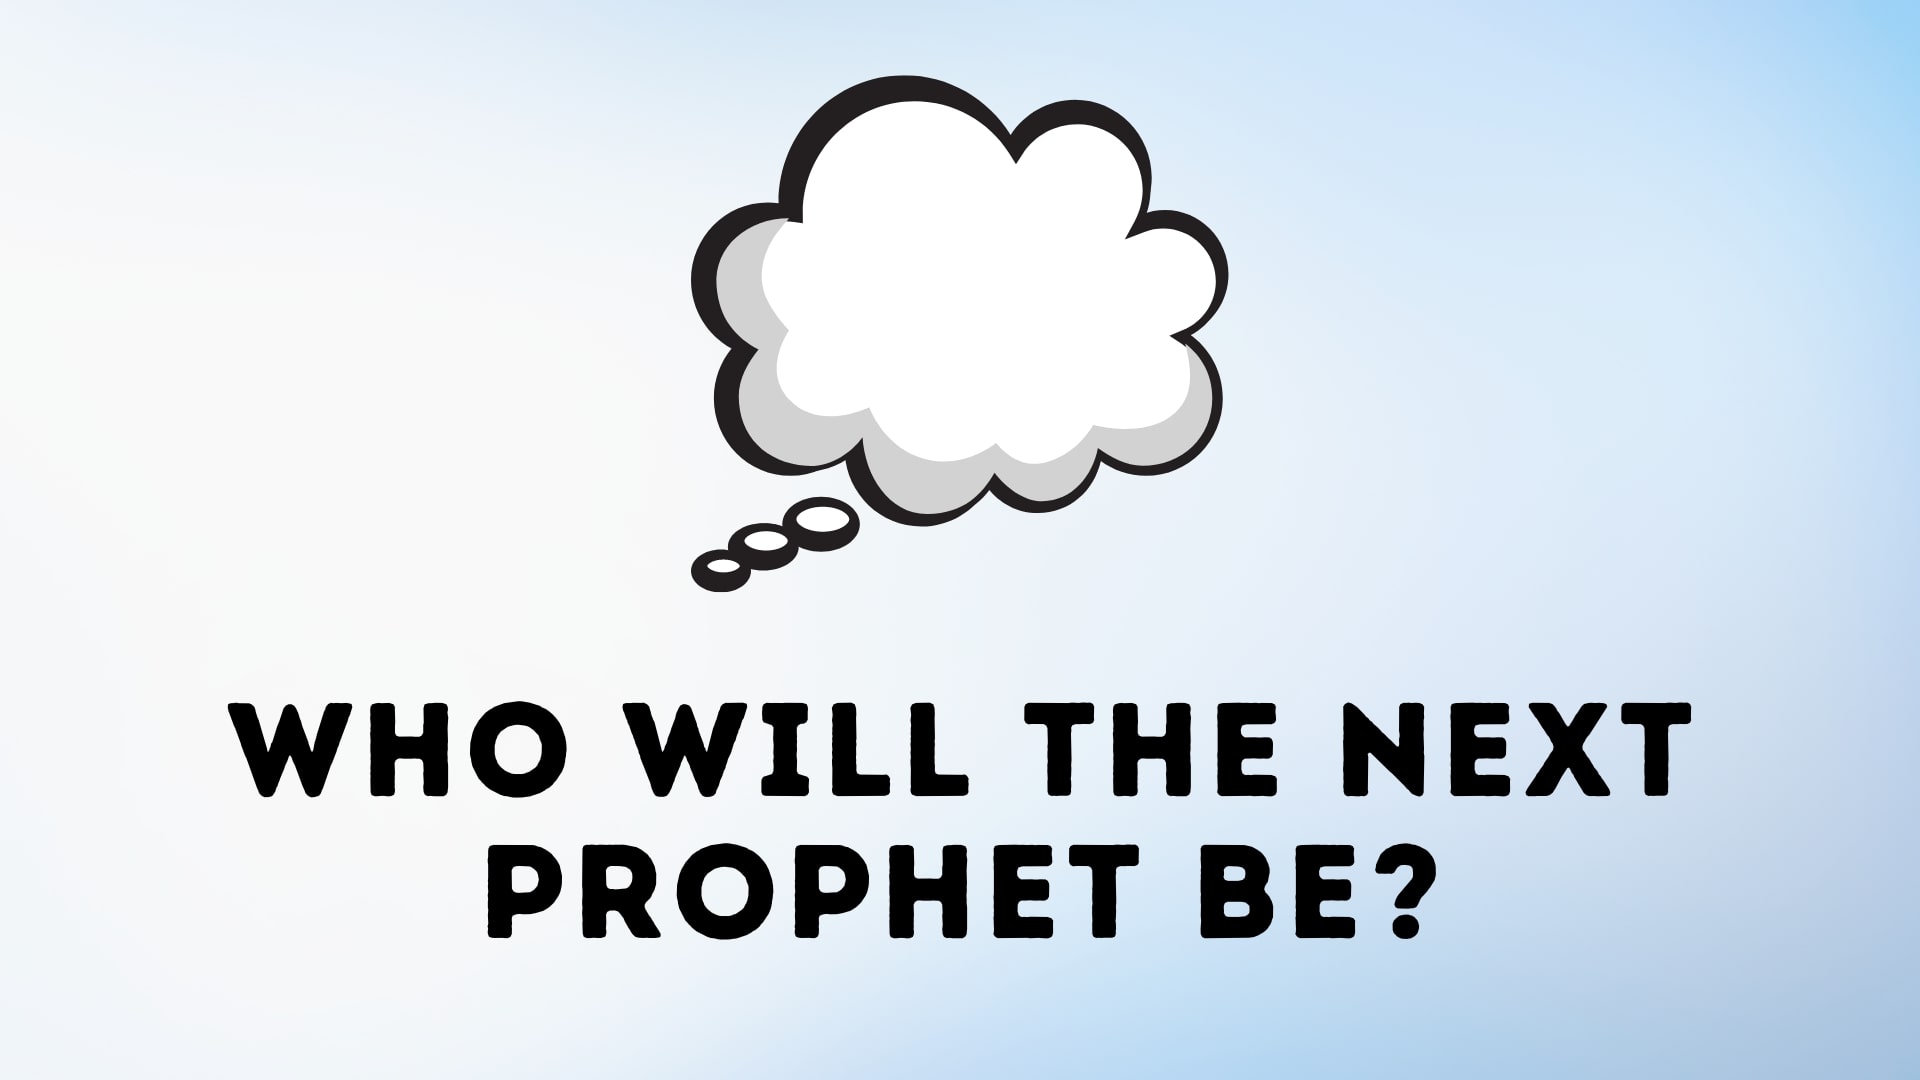 Who will the next prophet be?